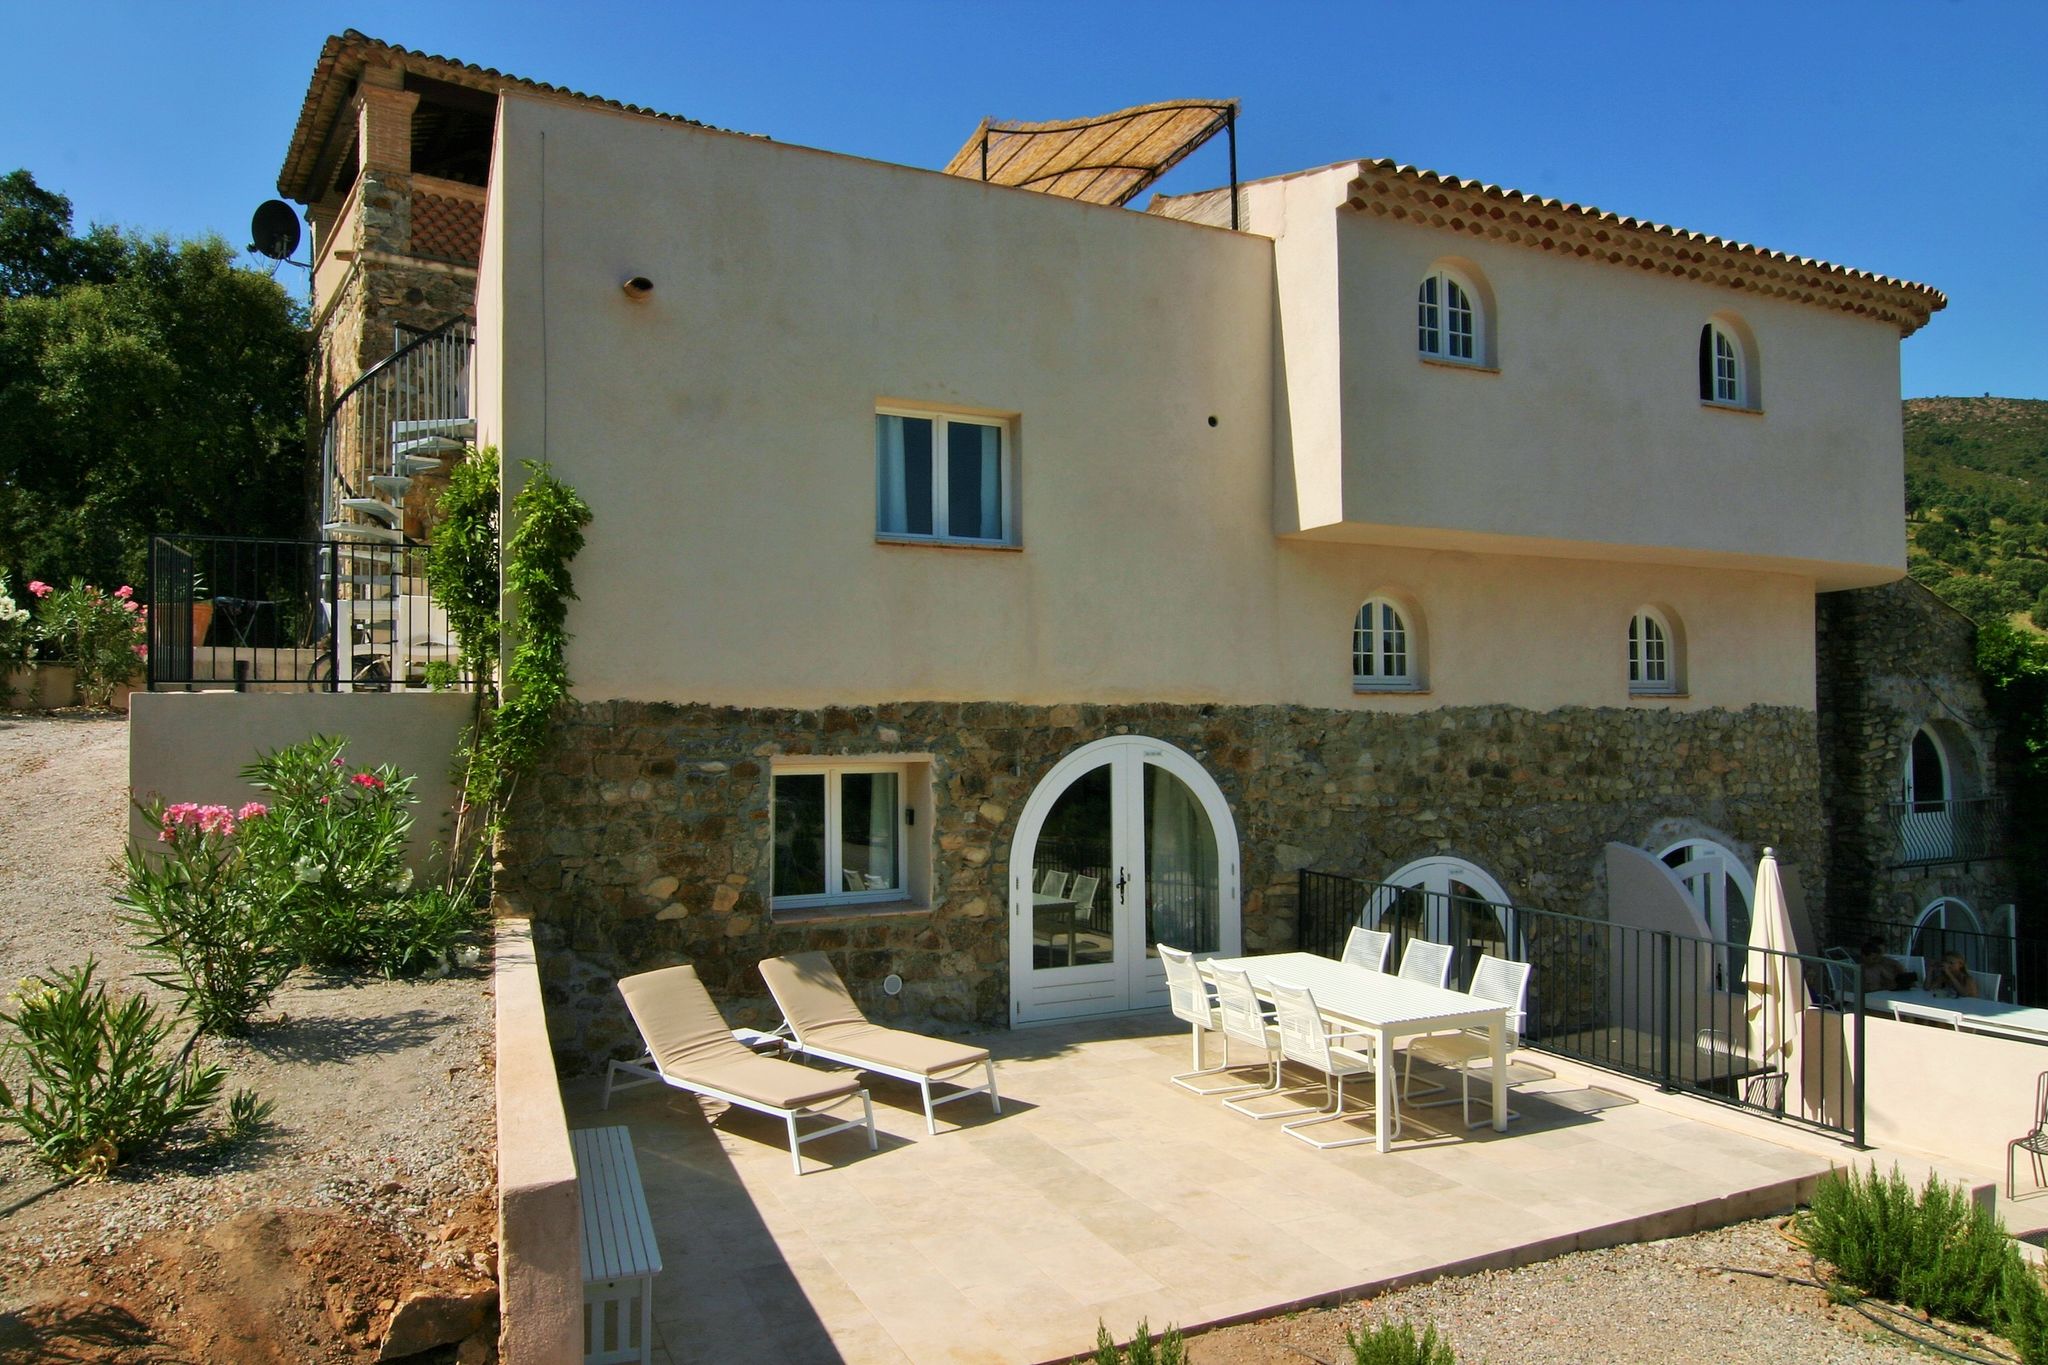 Modern house with roof terrace, near the popular St. Maxime